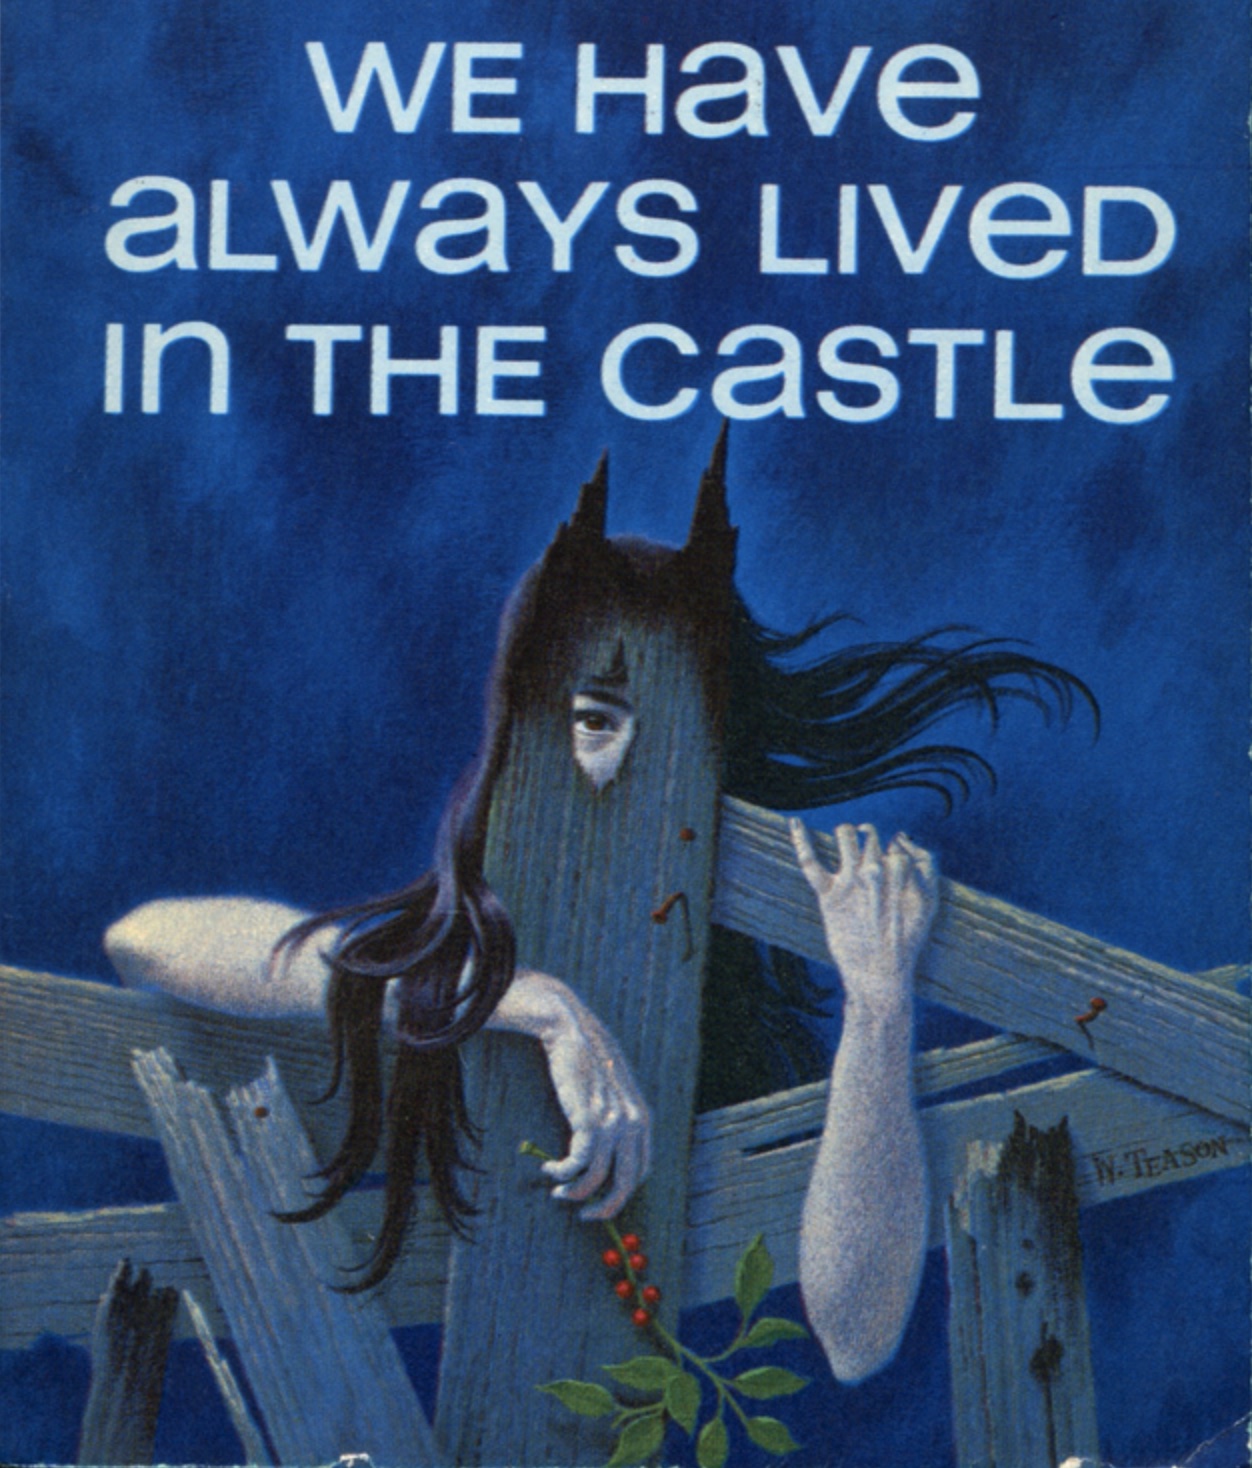 Auditions for We Have Always Lived in the Castle, by Bottle Alley Theatre Company